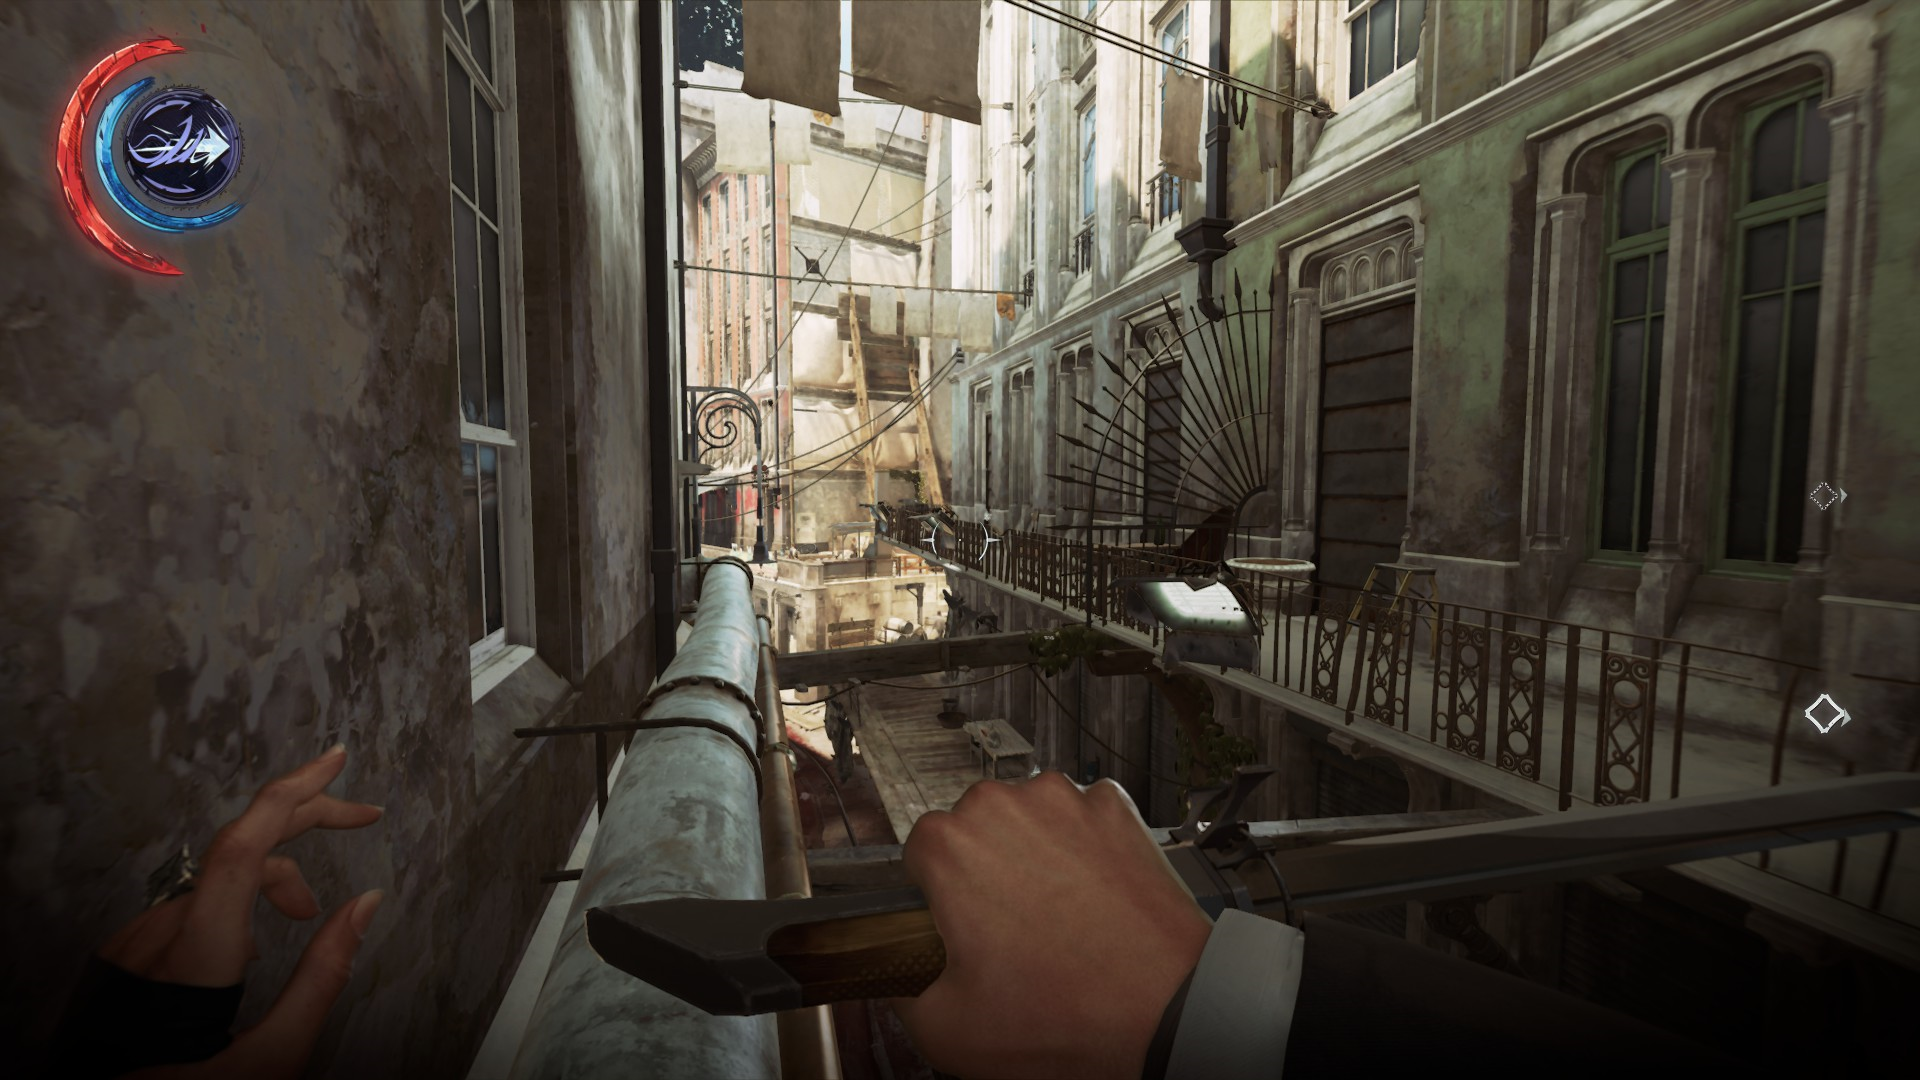 A Closer Look At Dishonored 2's Best Level